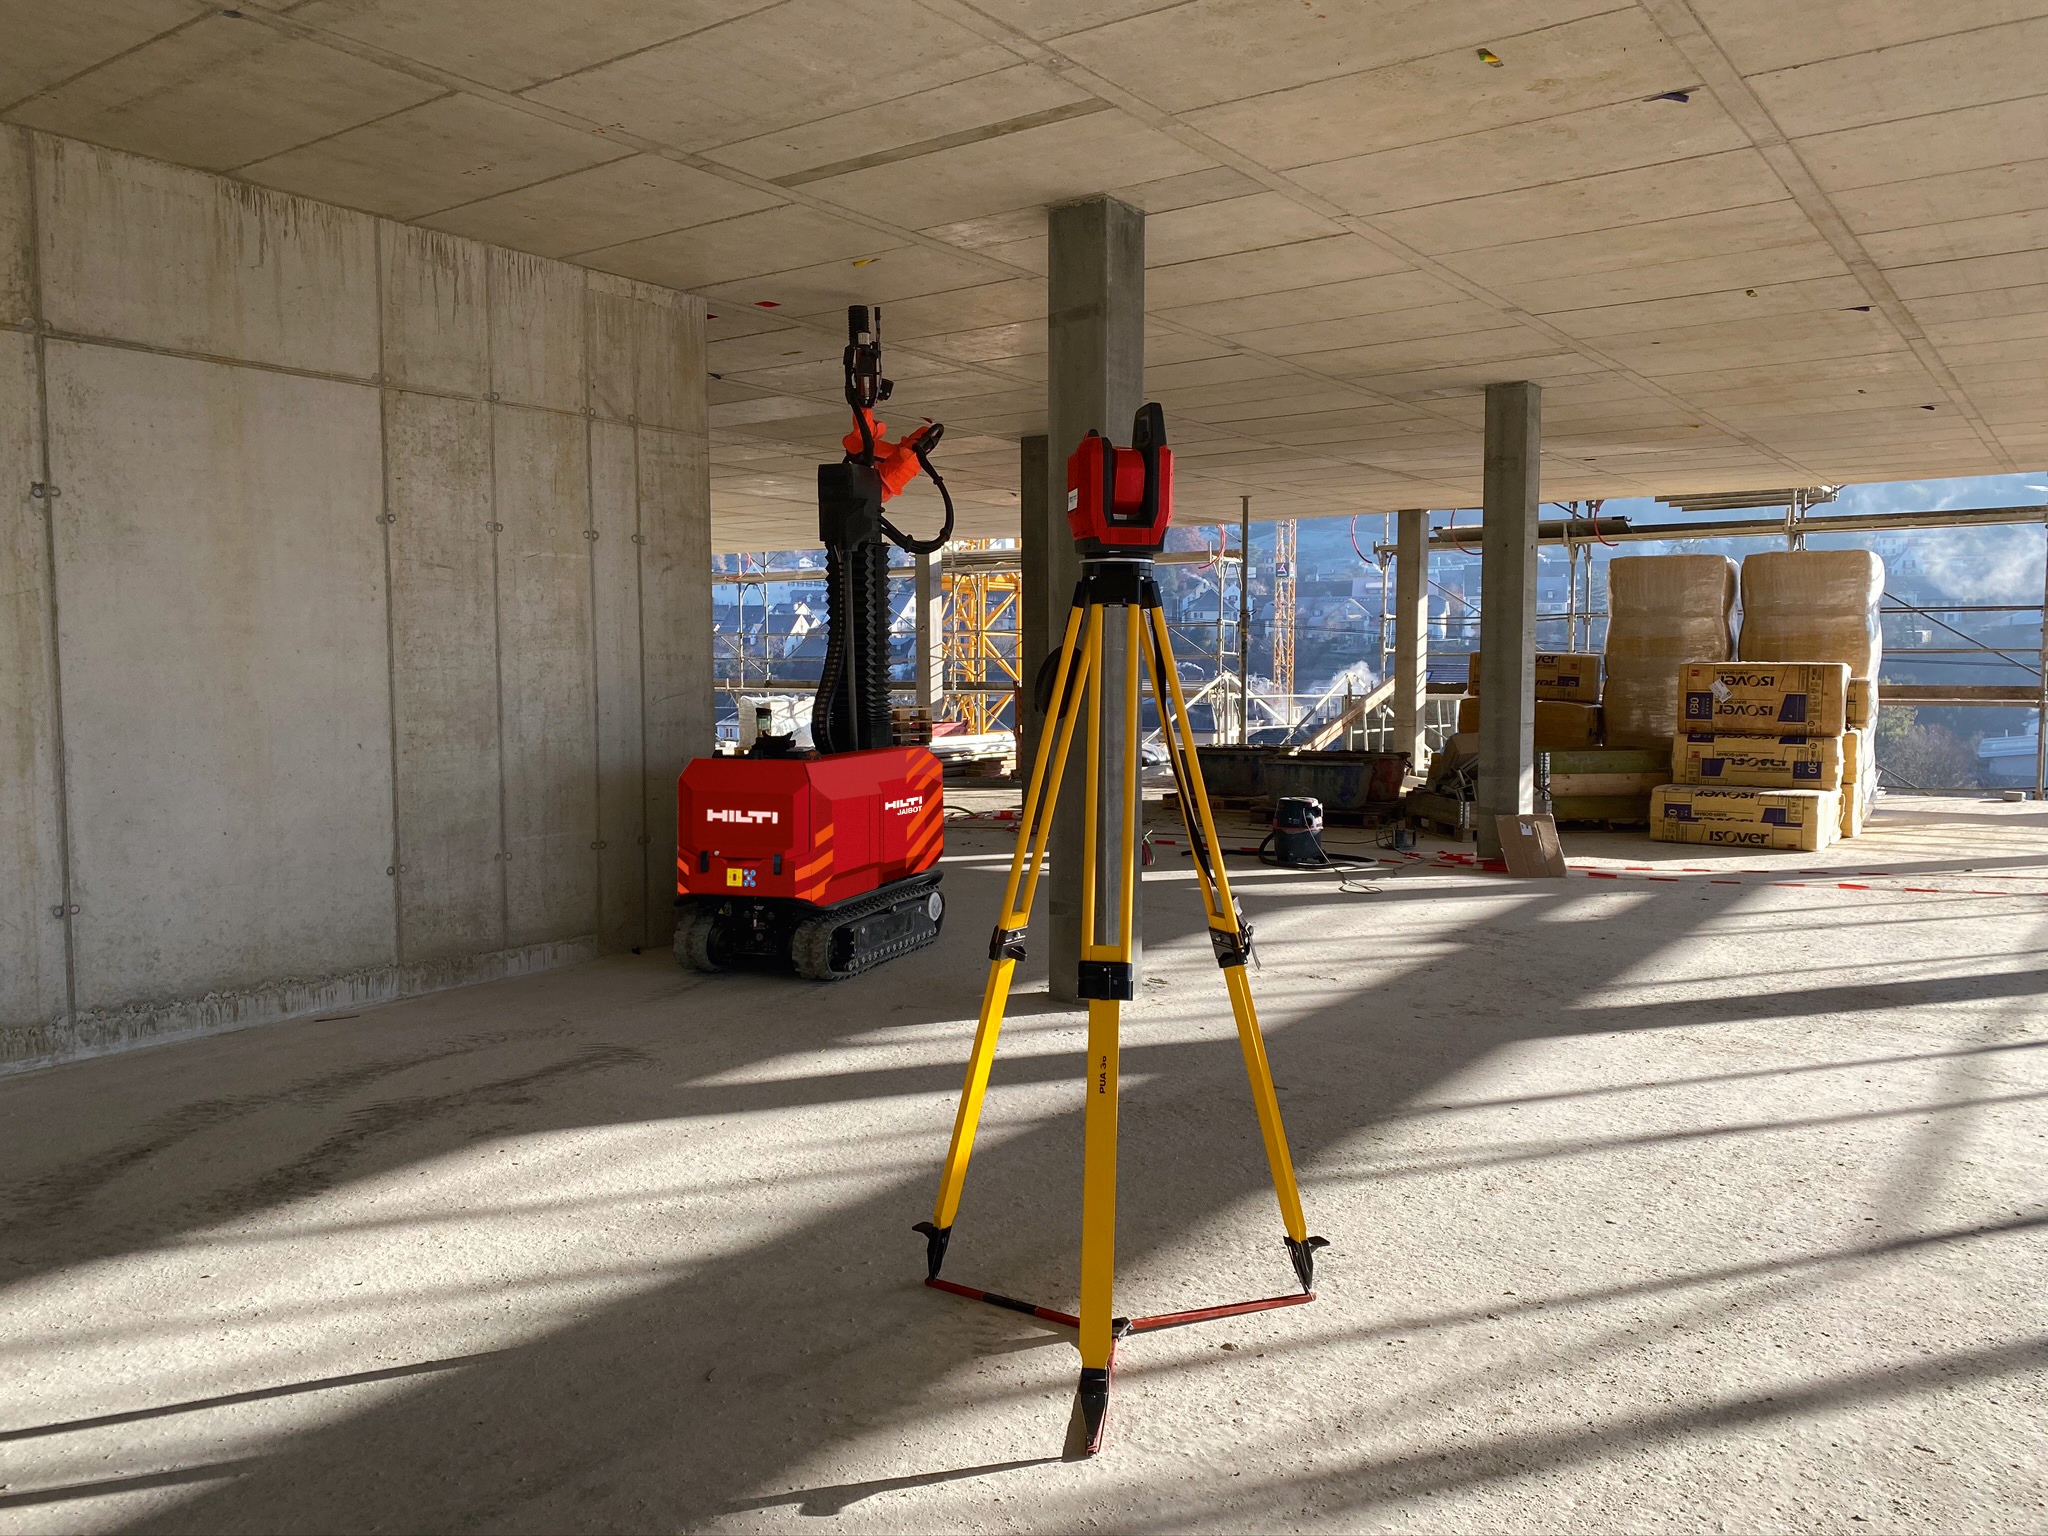 Hilti Jaibot is an example of robotics and automation in the construction industry